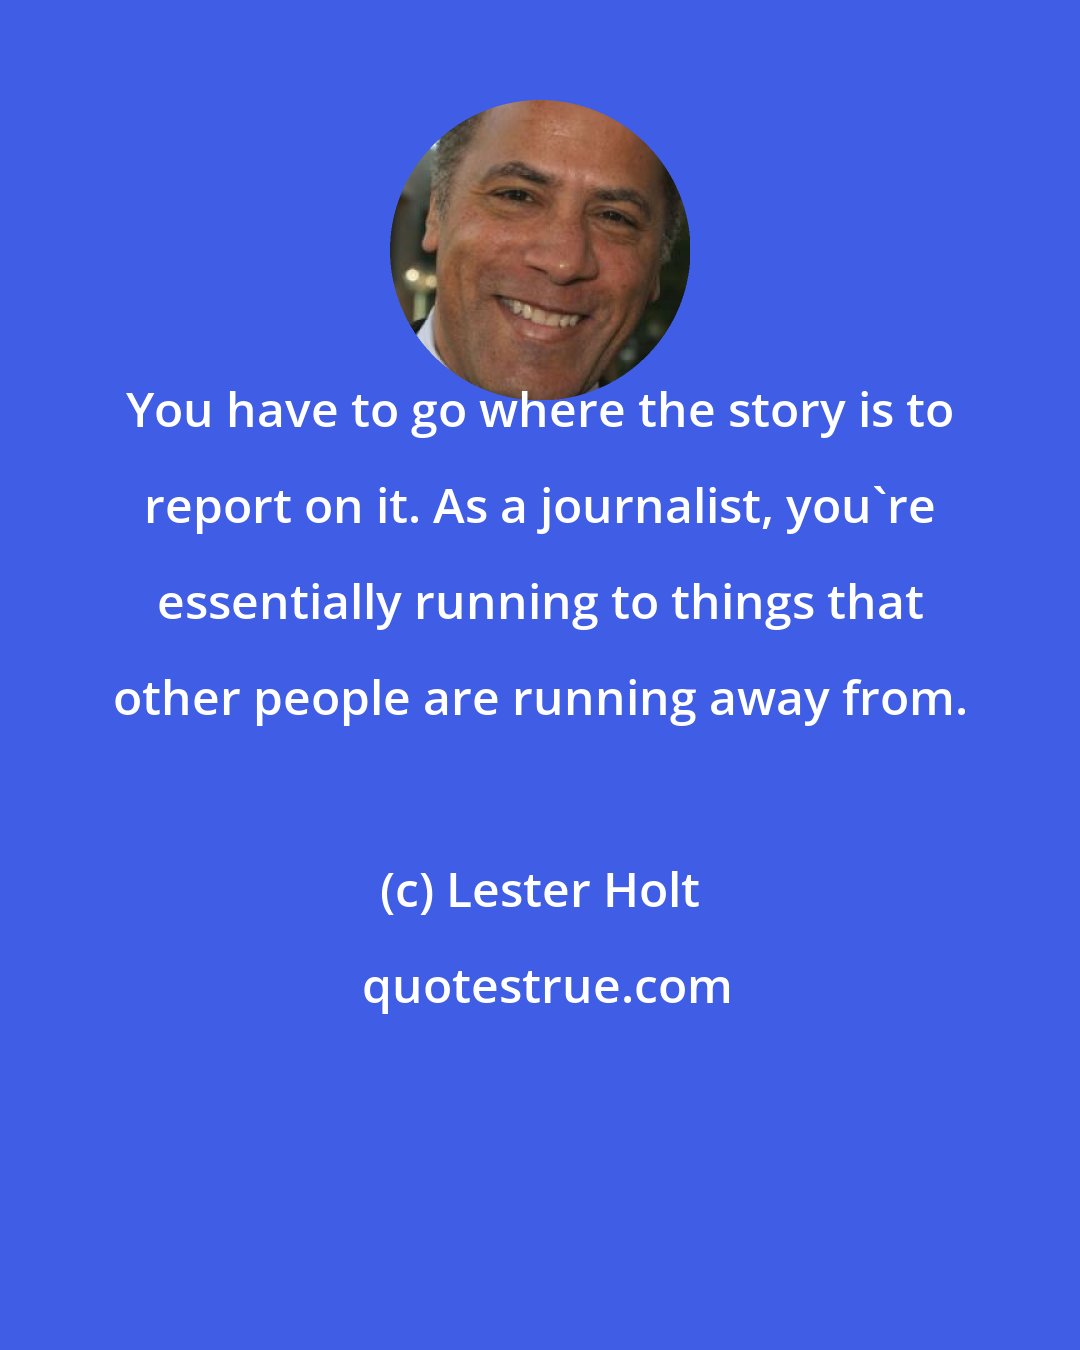 Lester Holt: You have to go where the story is to report on it. As a journalist, you're essentially running to things that other people are running away from.